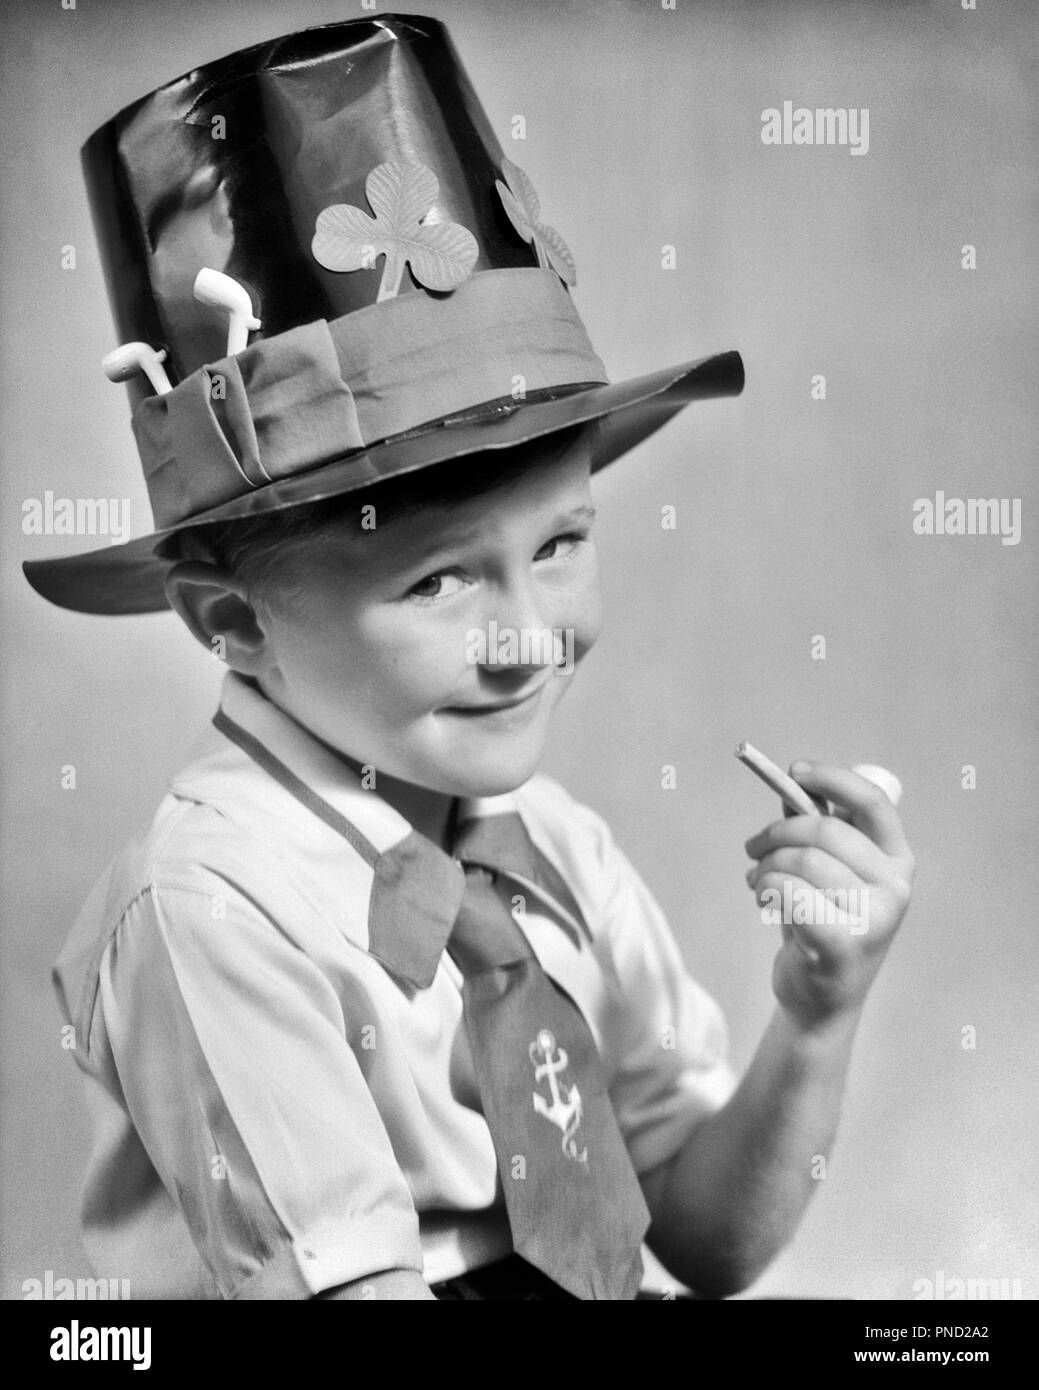 1930s IMPISH YOUNG IRISH LAD SMILING LOOKING AT CAMERA WEARING TOP HAT  DECORATED WITH SHAMROCKS HOLDING TRADITIONAL CLAY PIPE - j6719 HAR001 HARS  HALF-LENGTH INSPIRATION IRELAND TRADITIONAL CHARACTER MALES CONFIDENCE  DECORATED EXPRESSIONS